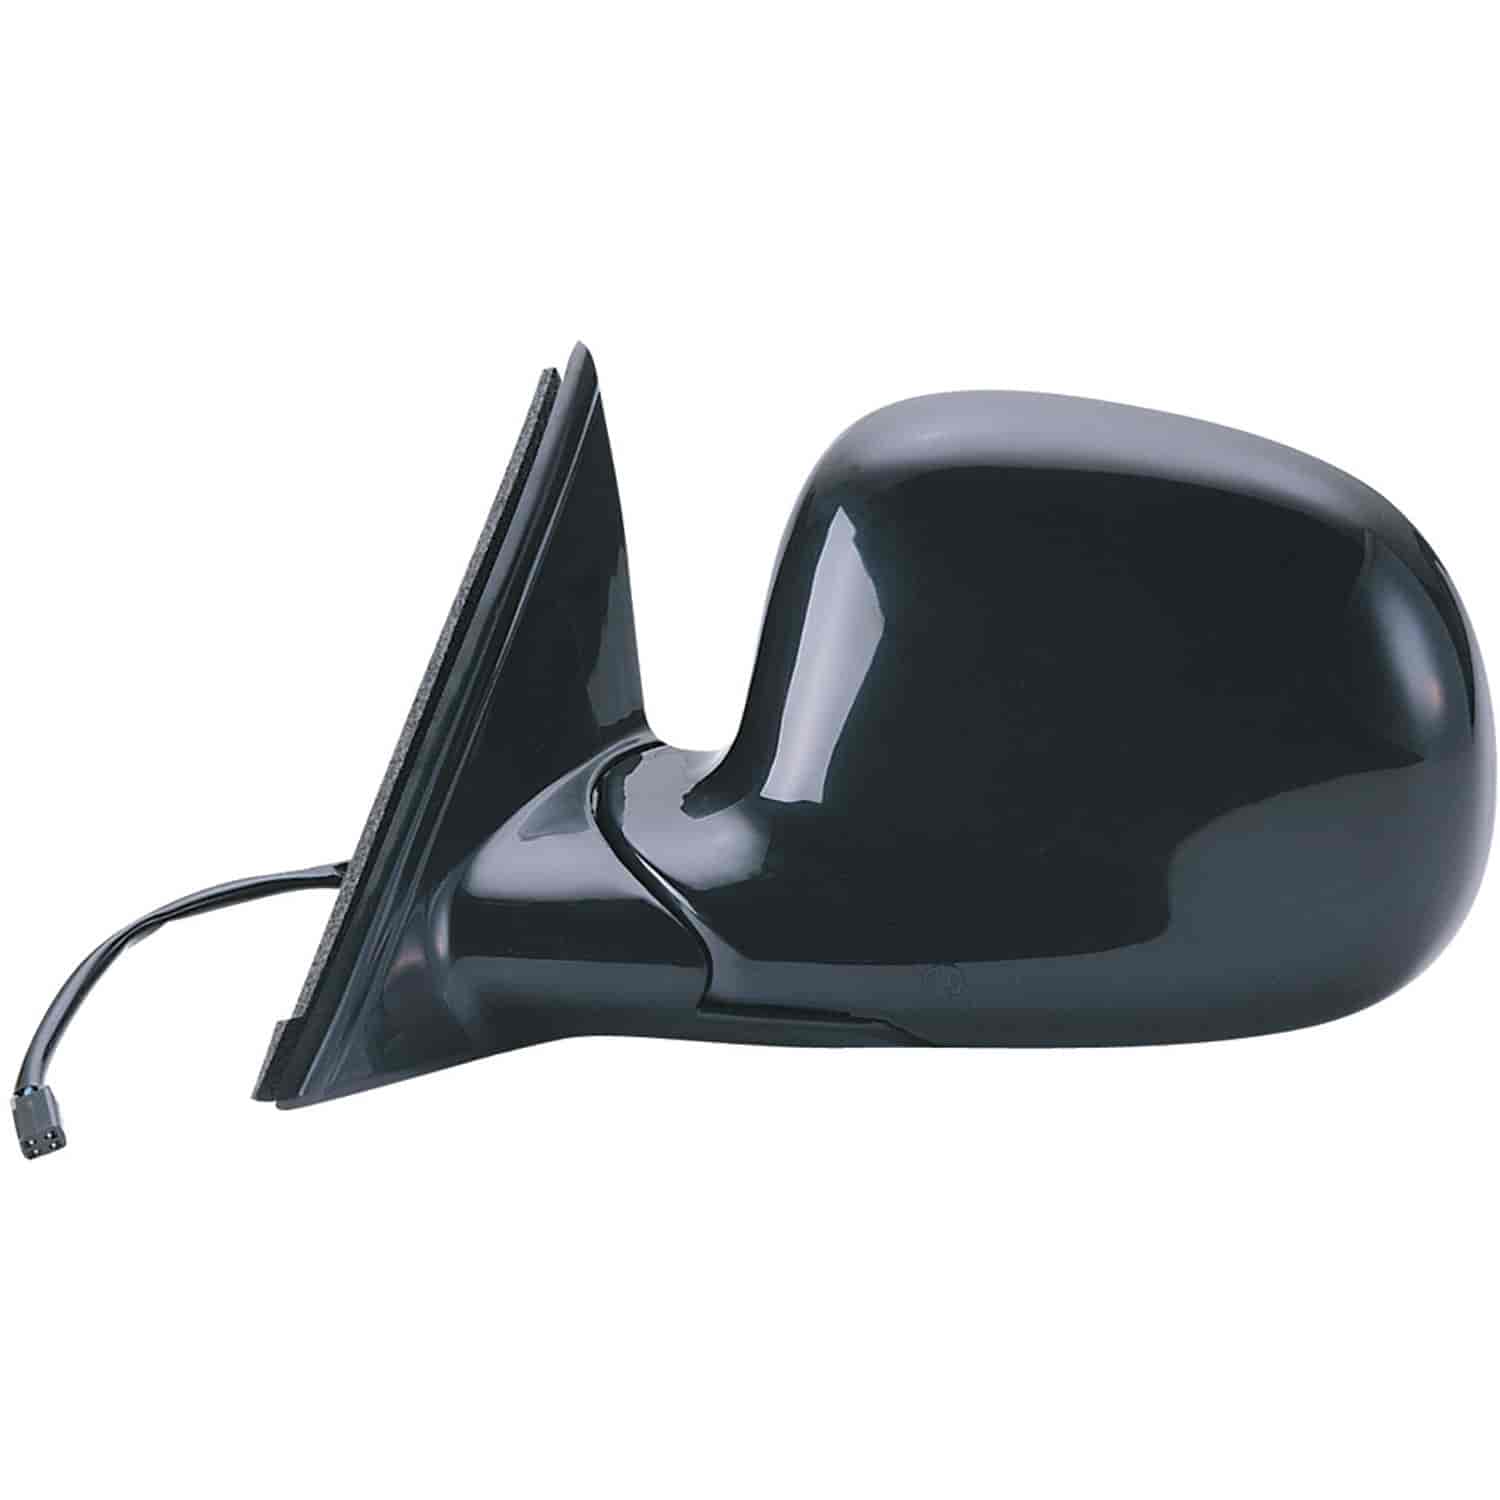 OEM Style Replacement mirror for 95-97 Blazer/ Jimmy/